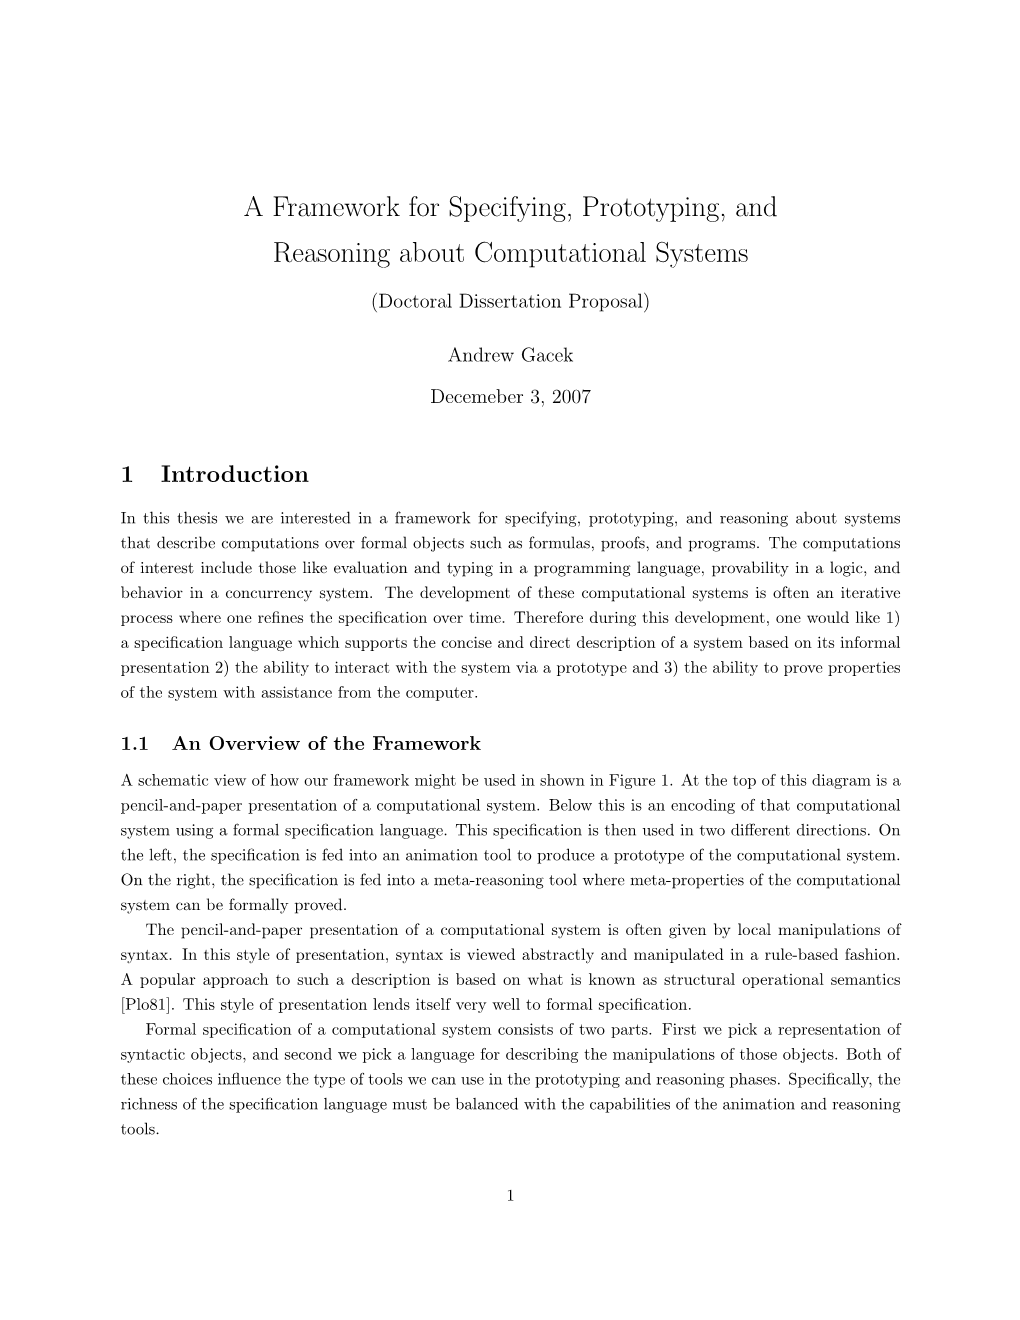 A Framework for Specifying, Prototyping, and Reasoning About Computational Systems